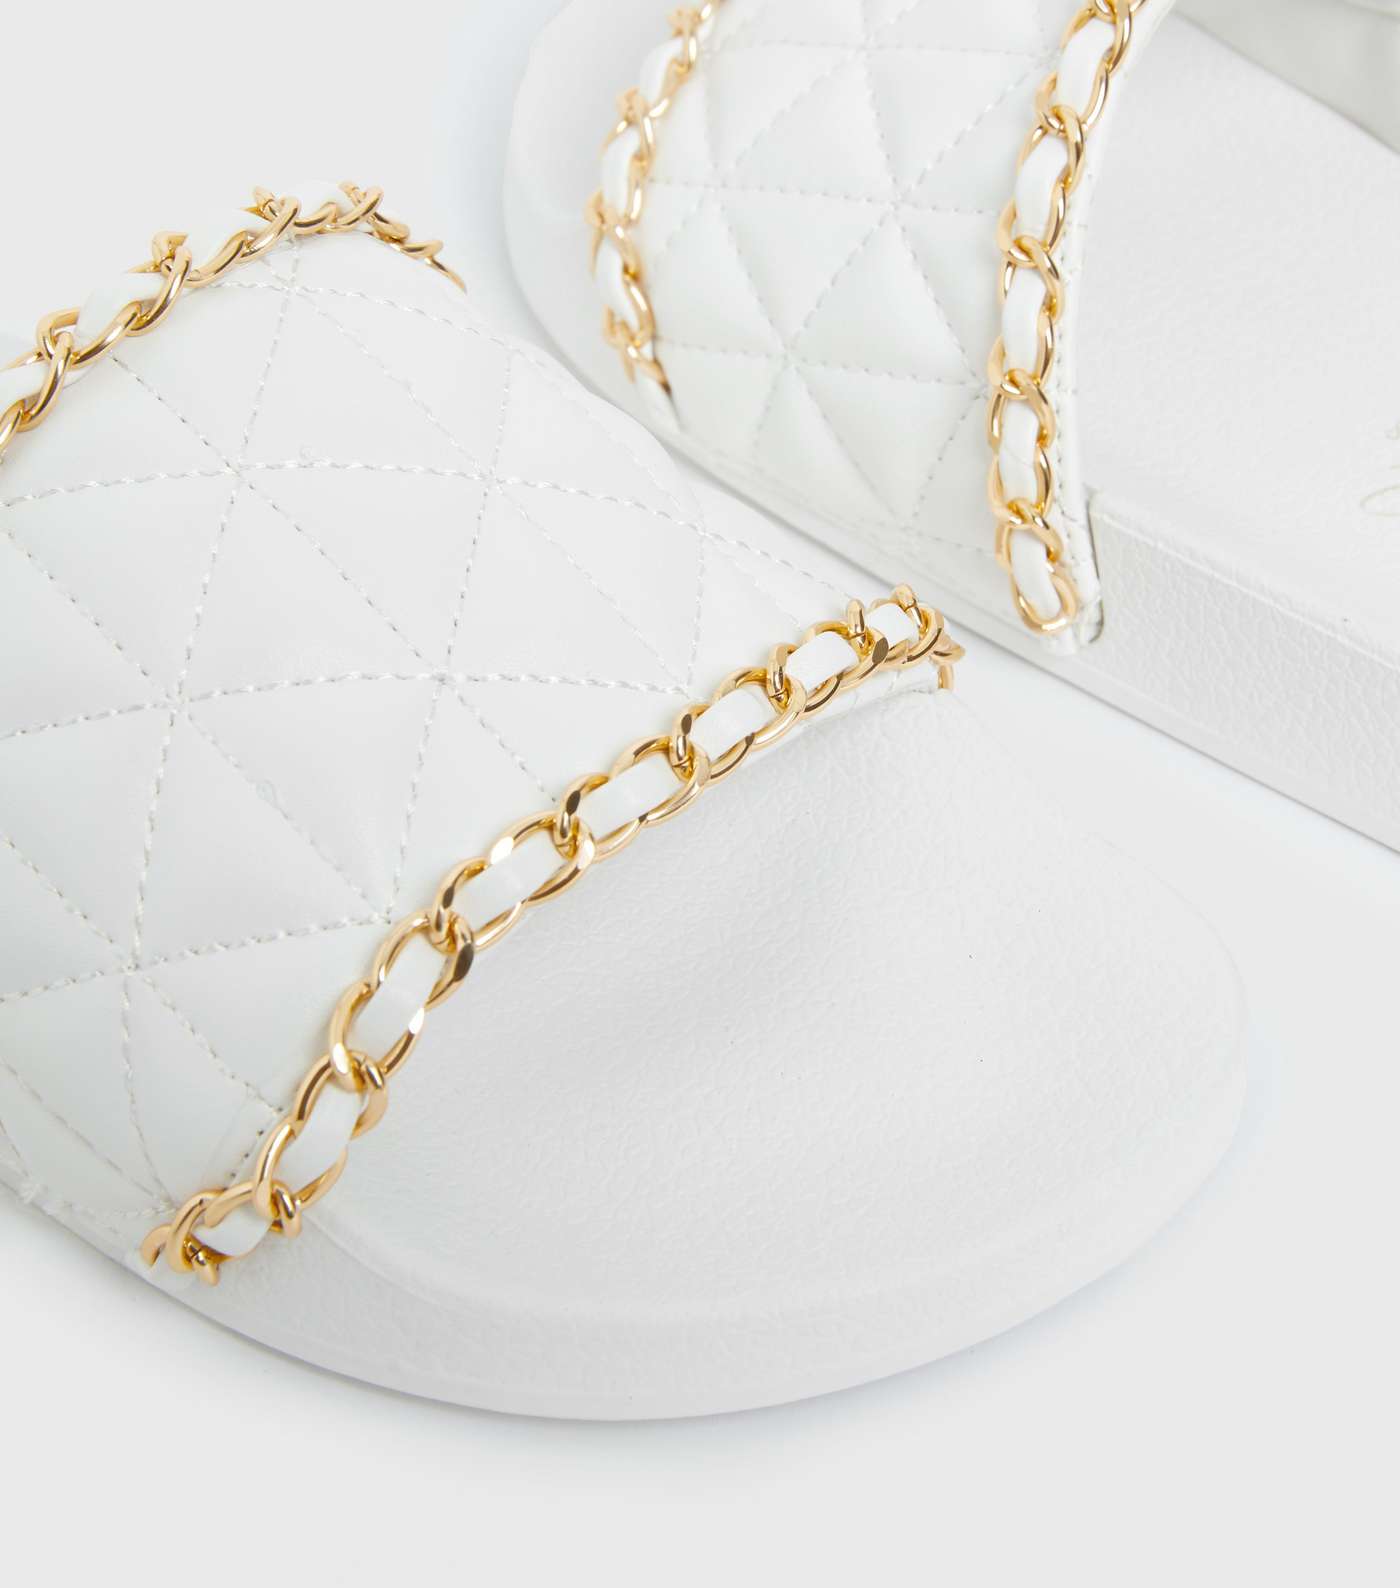 Bon Voyage White Leather-Look Chain Sliders Image 4